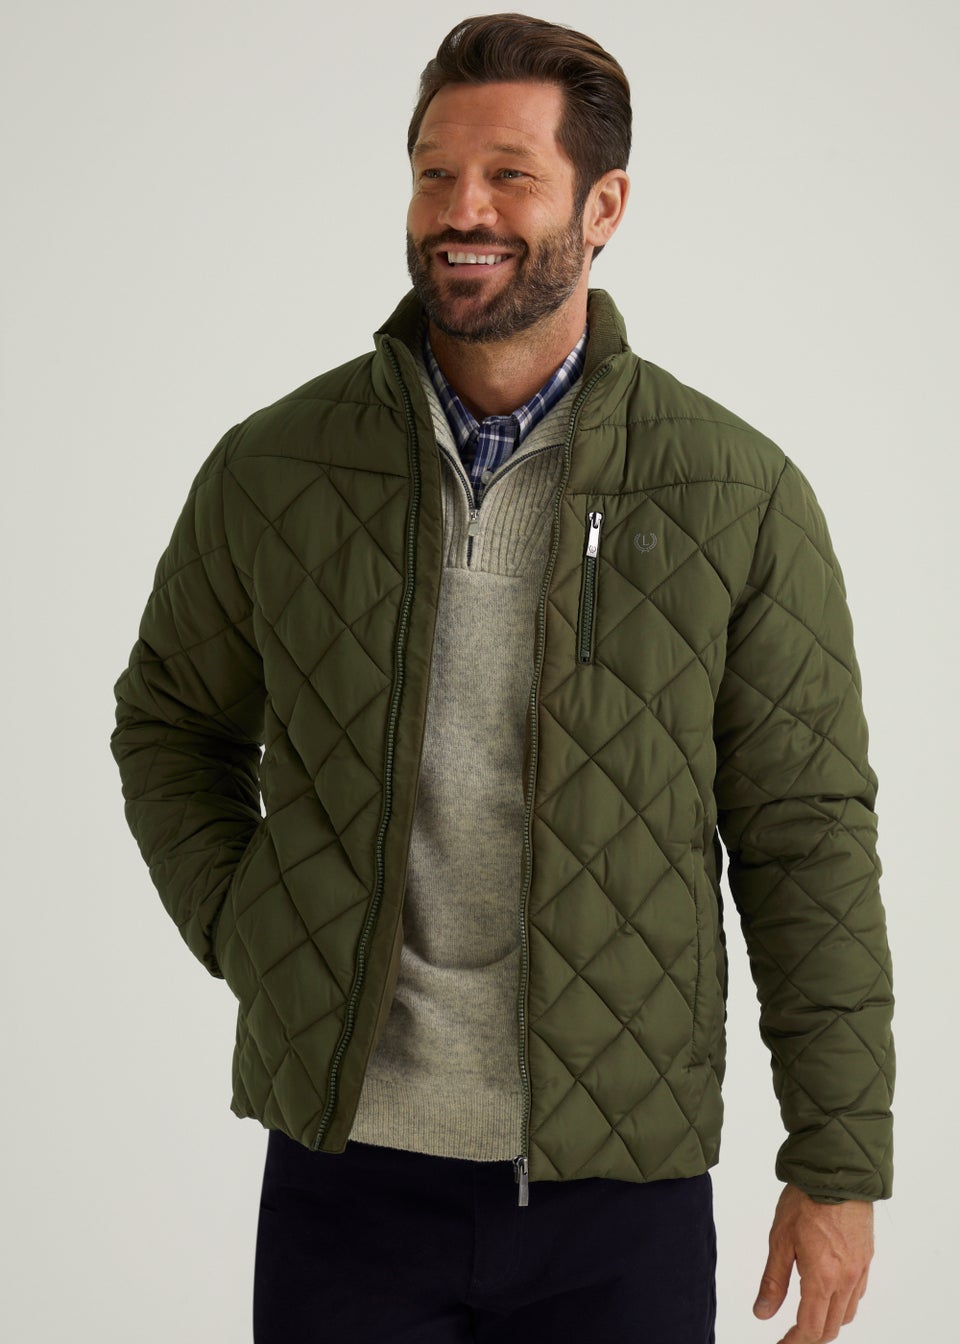 Lincoln Khaki Diamond Quilted Jacket